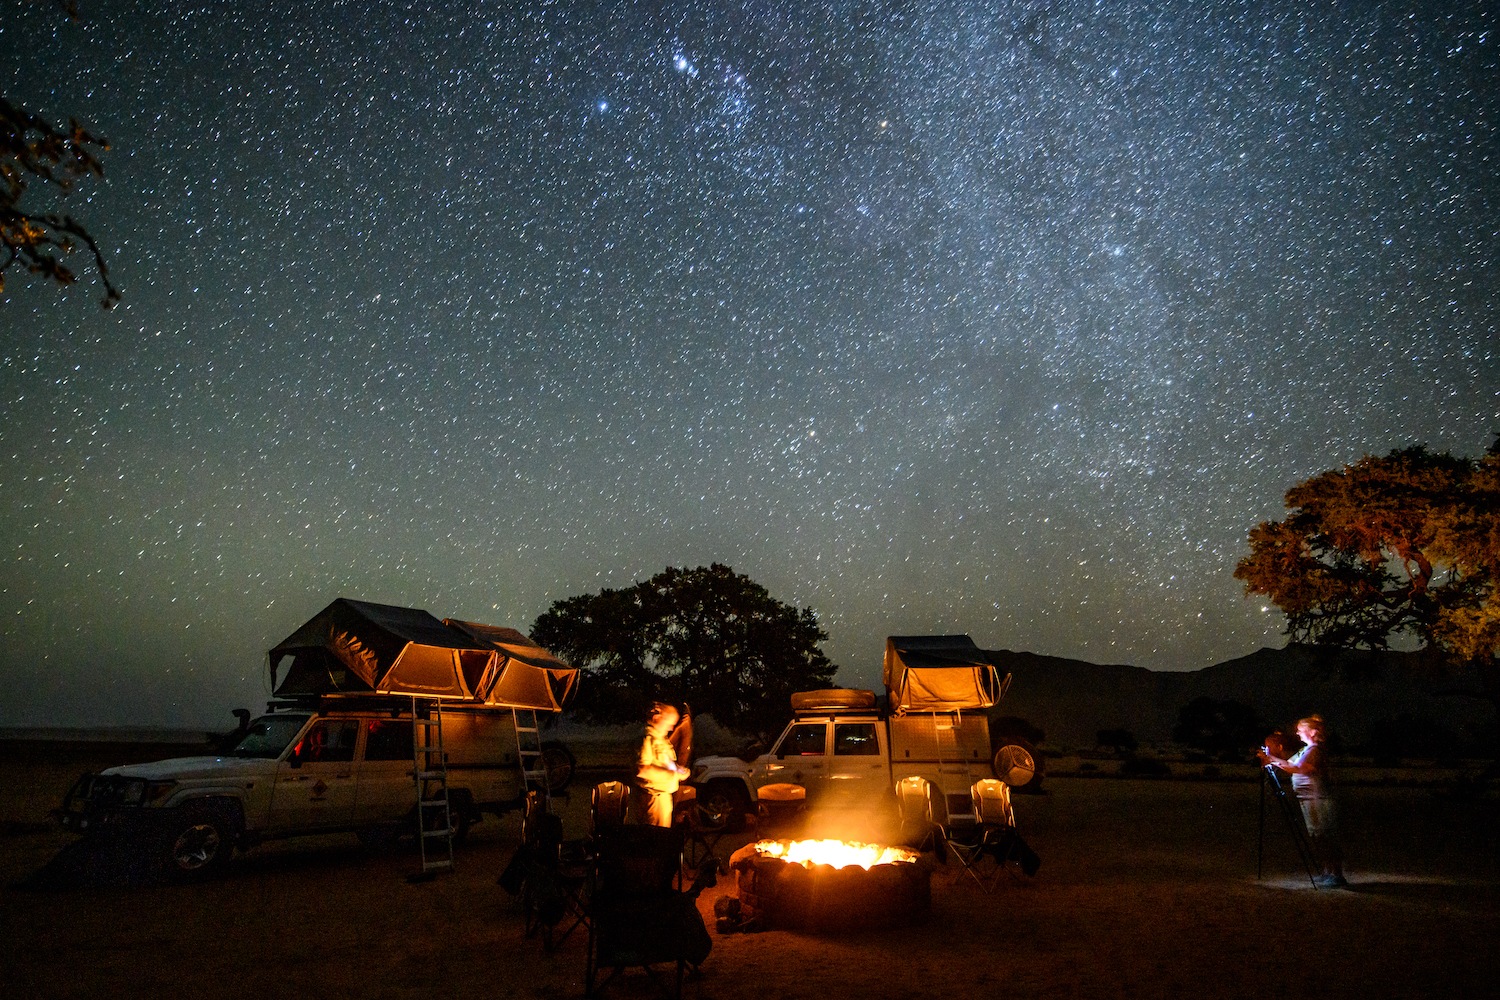 Overland camping shelter options: rooftop tents under the stars